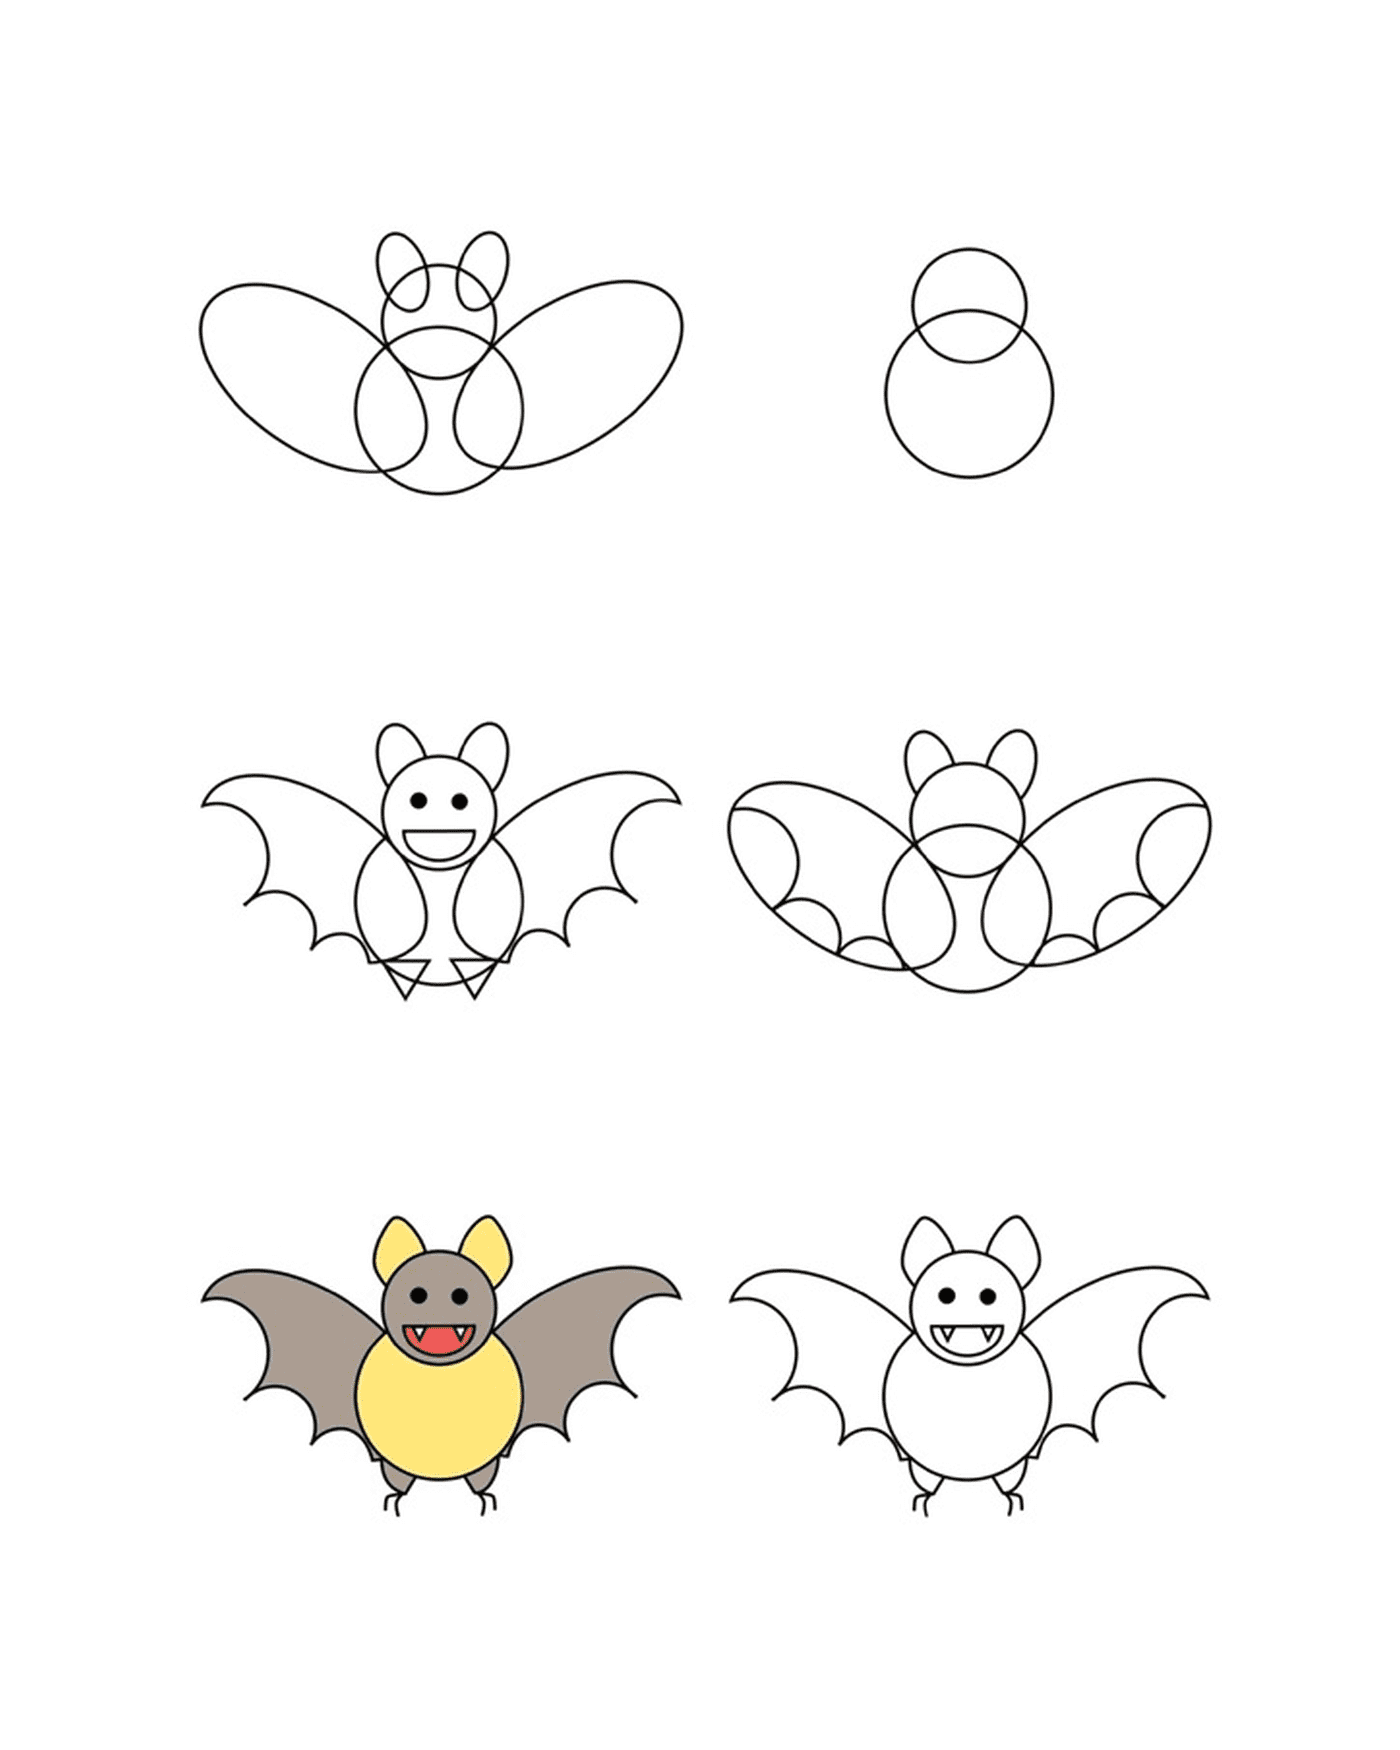  How to draw a bat 